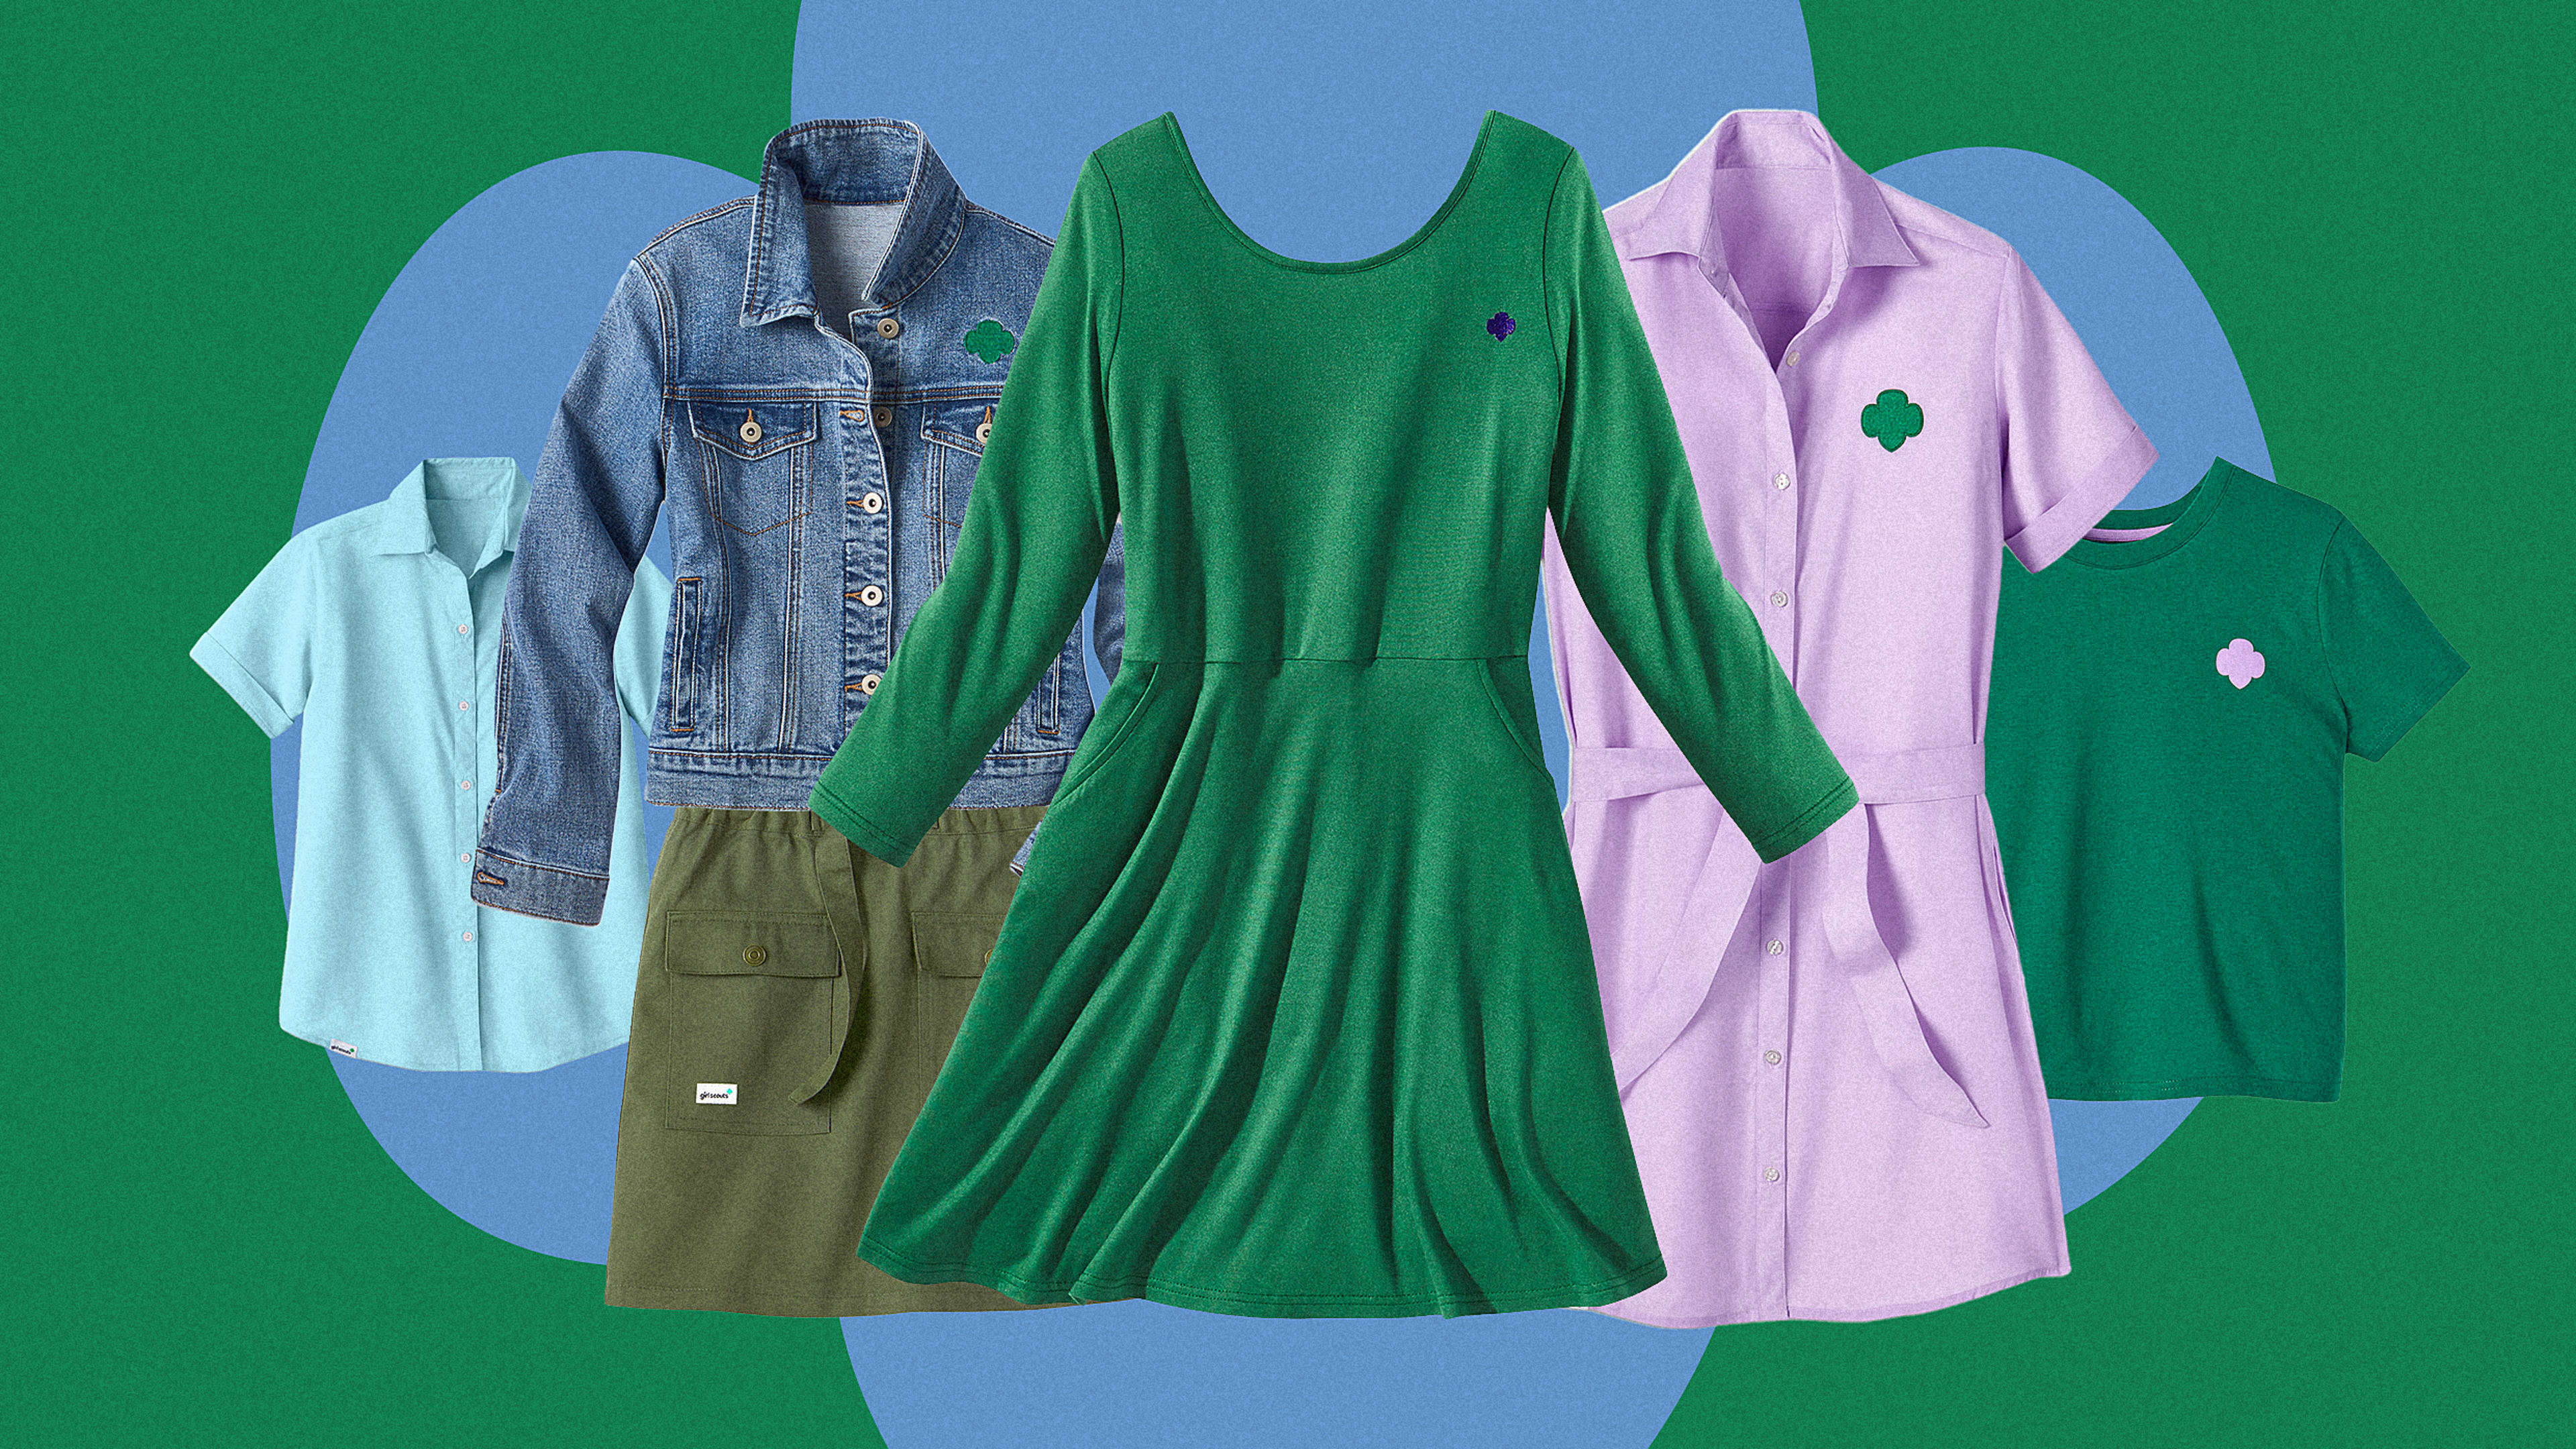 Girl Scouts’ iconic uniforms get a makeover